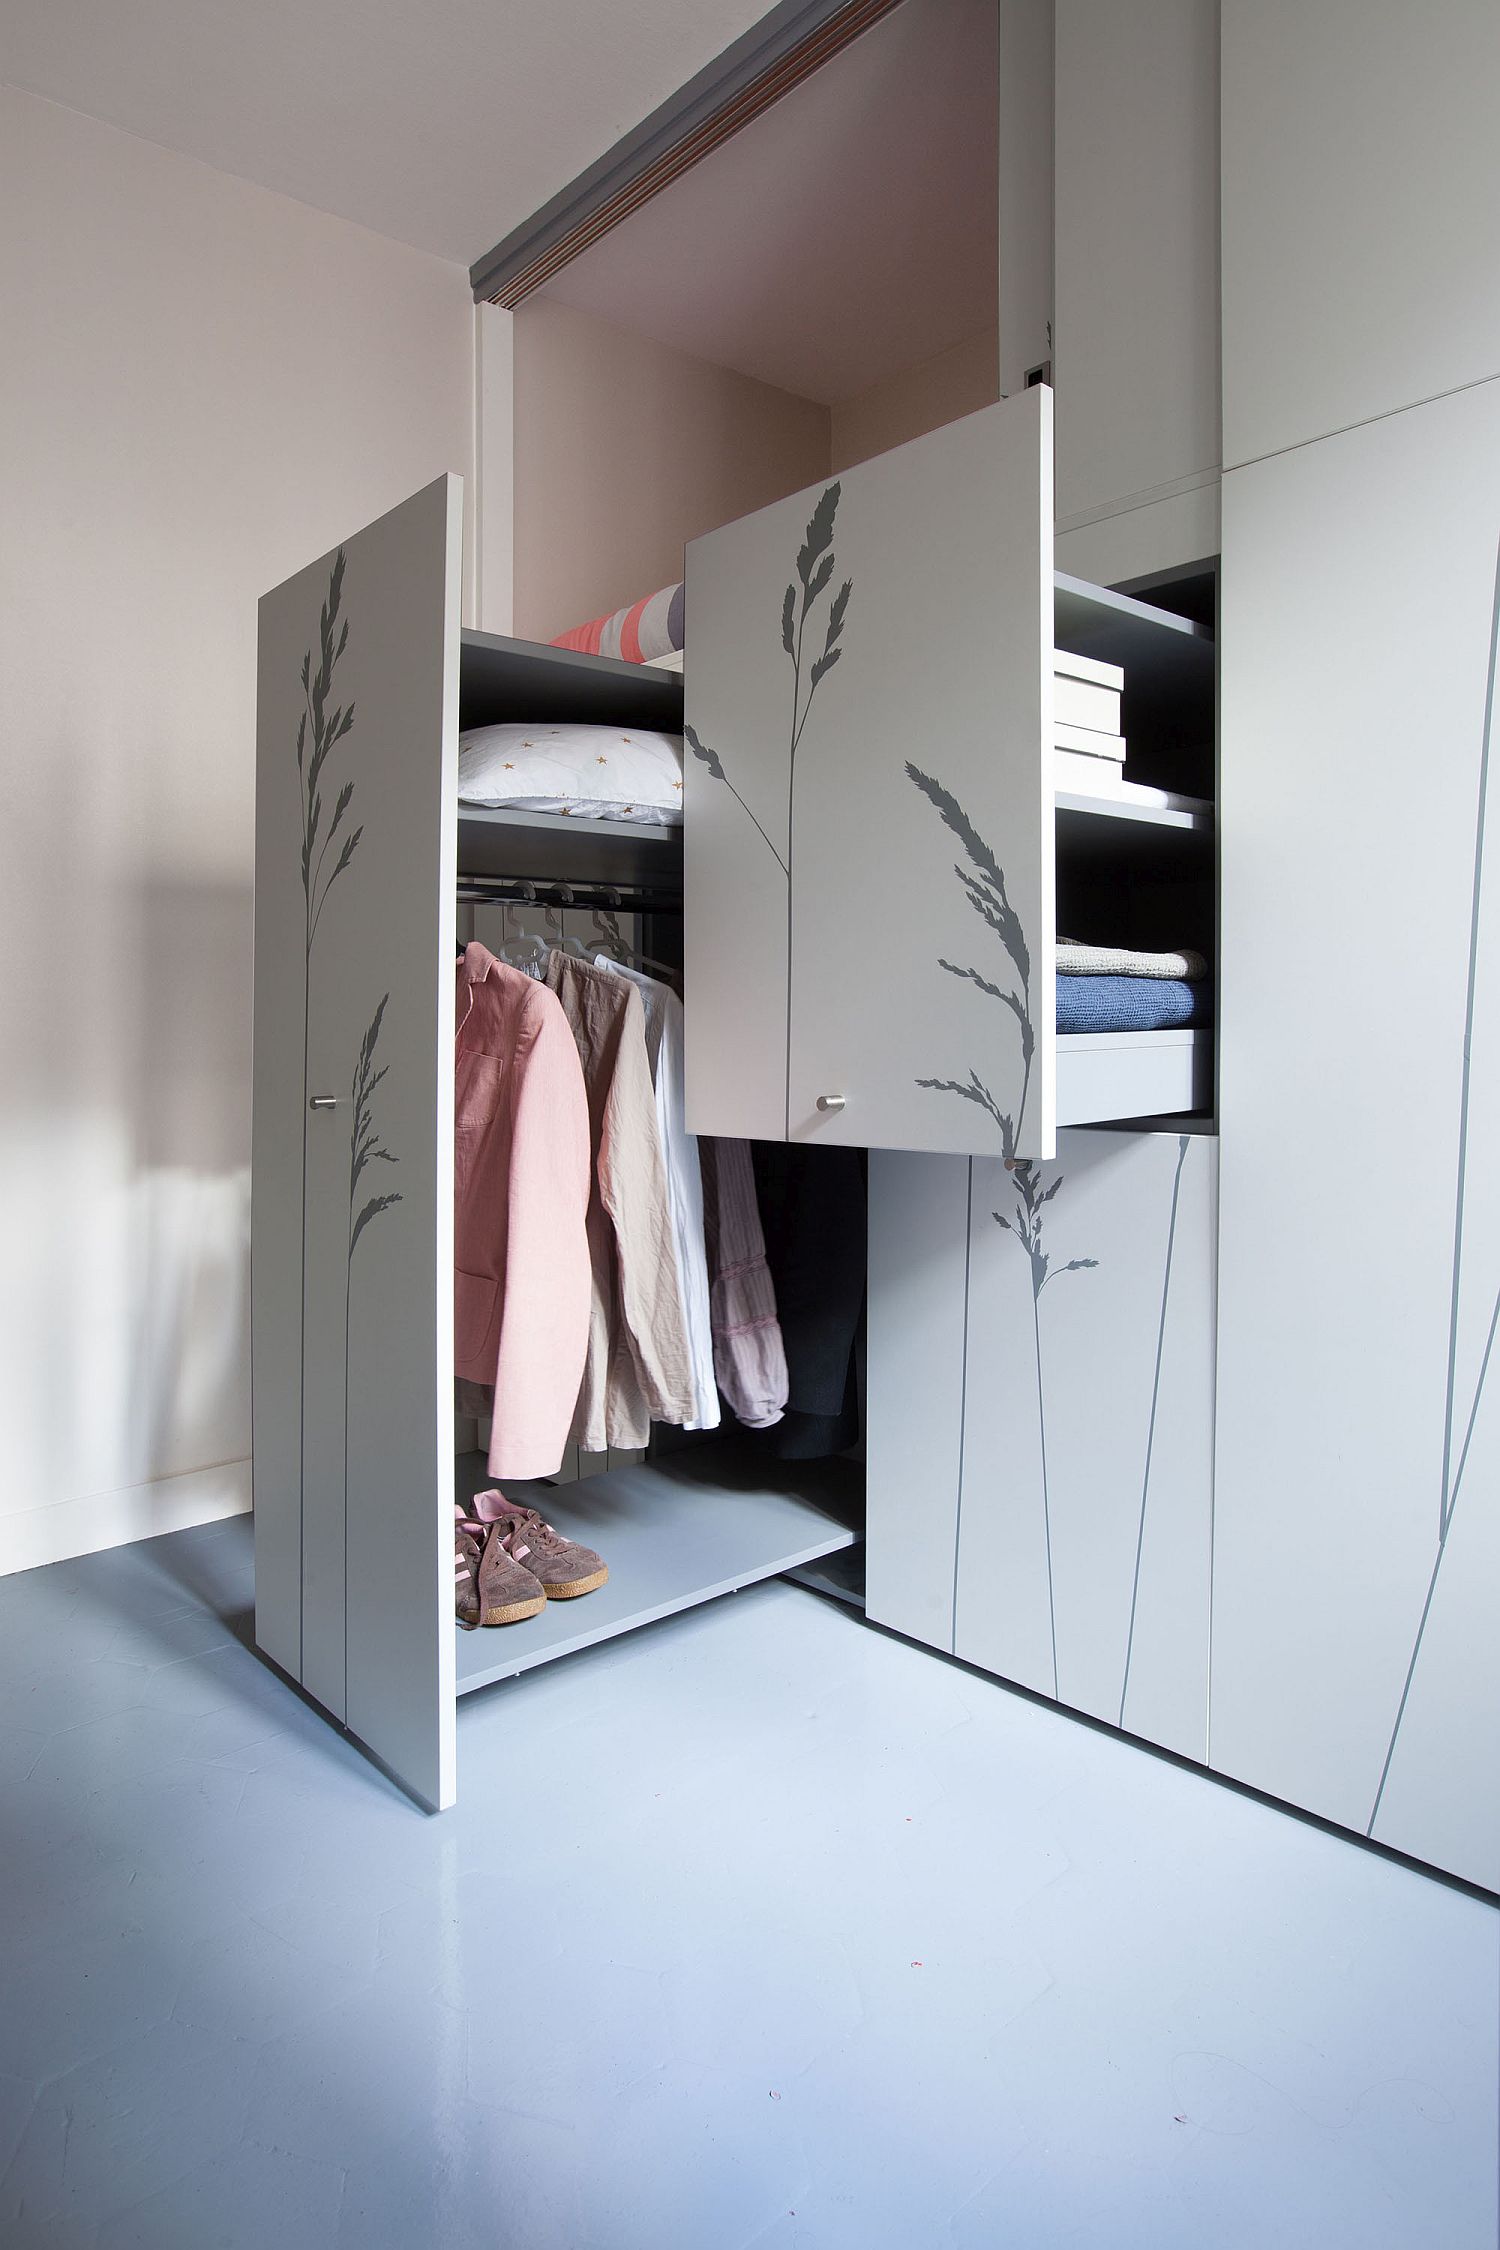 Closet-allows-for-smart-organization-of-wardrobe-without-wastage-of-space-64526